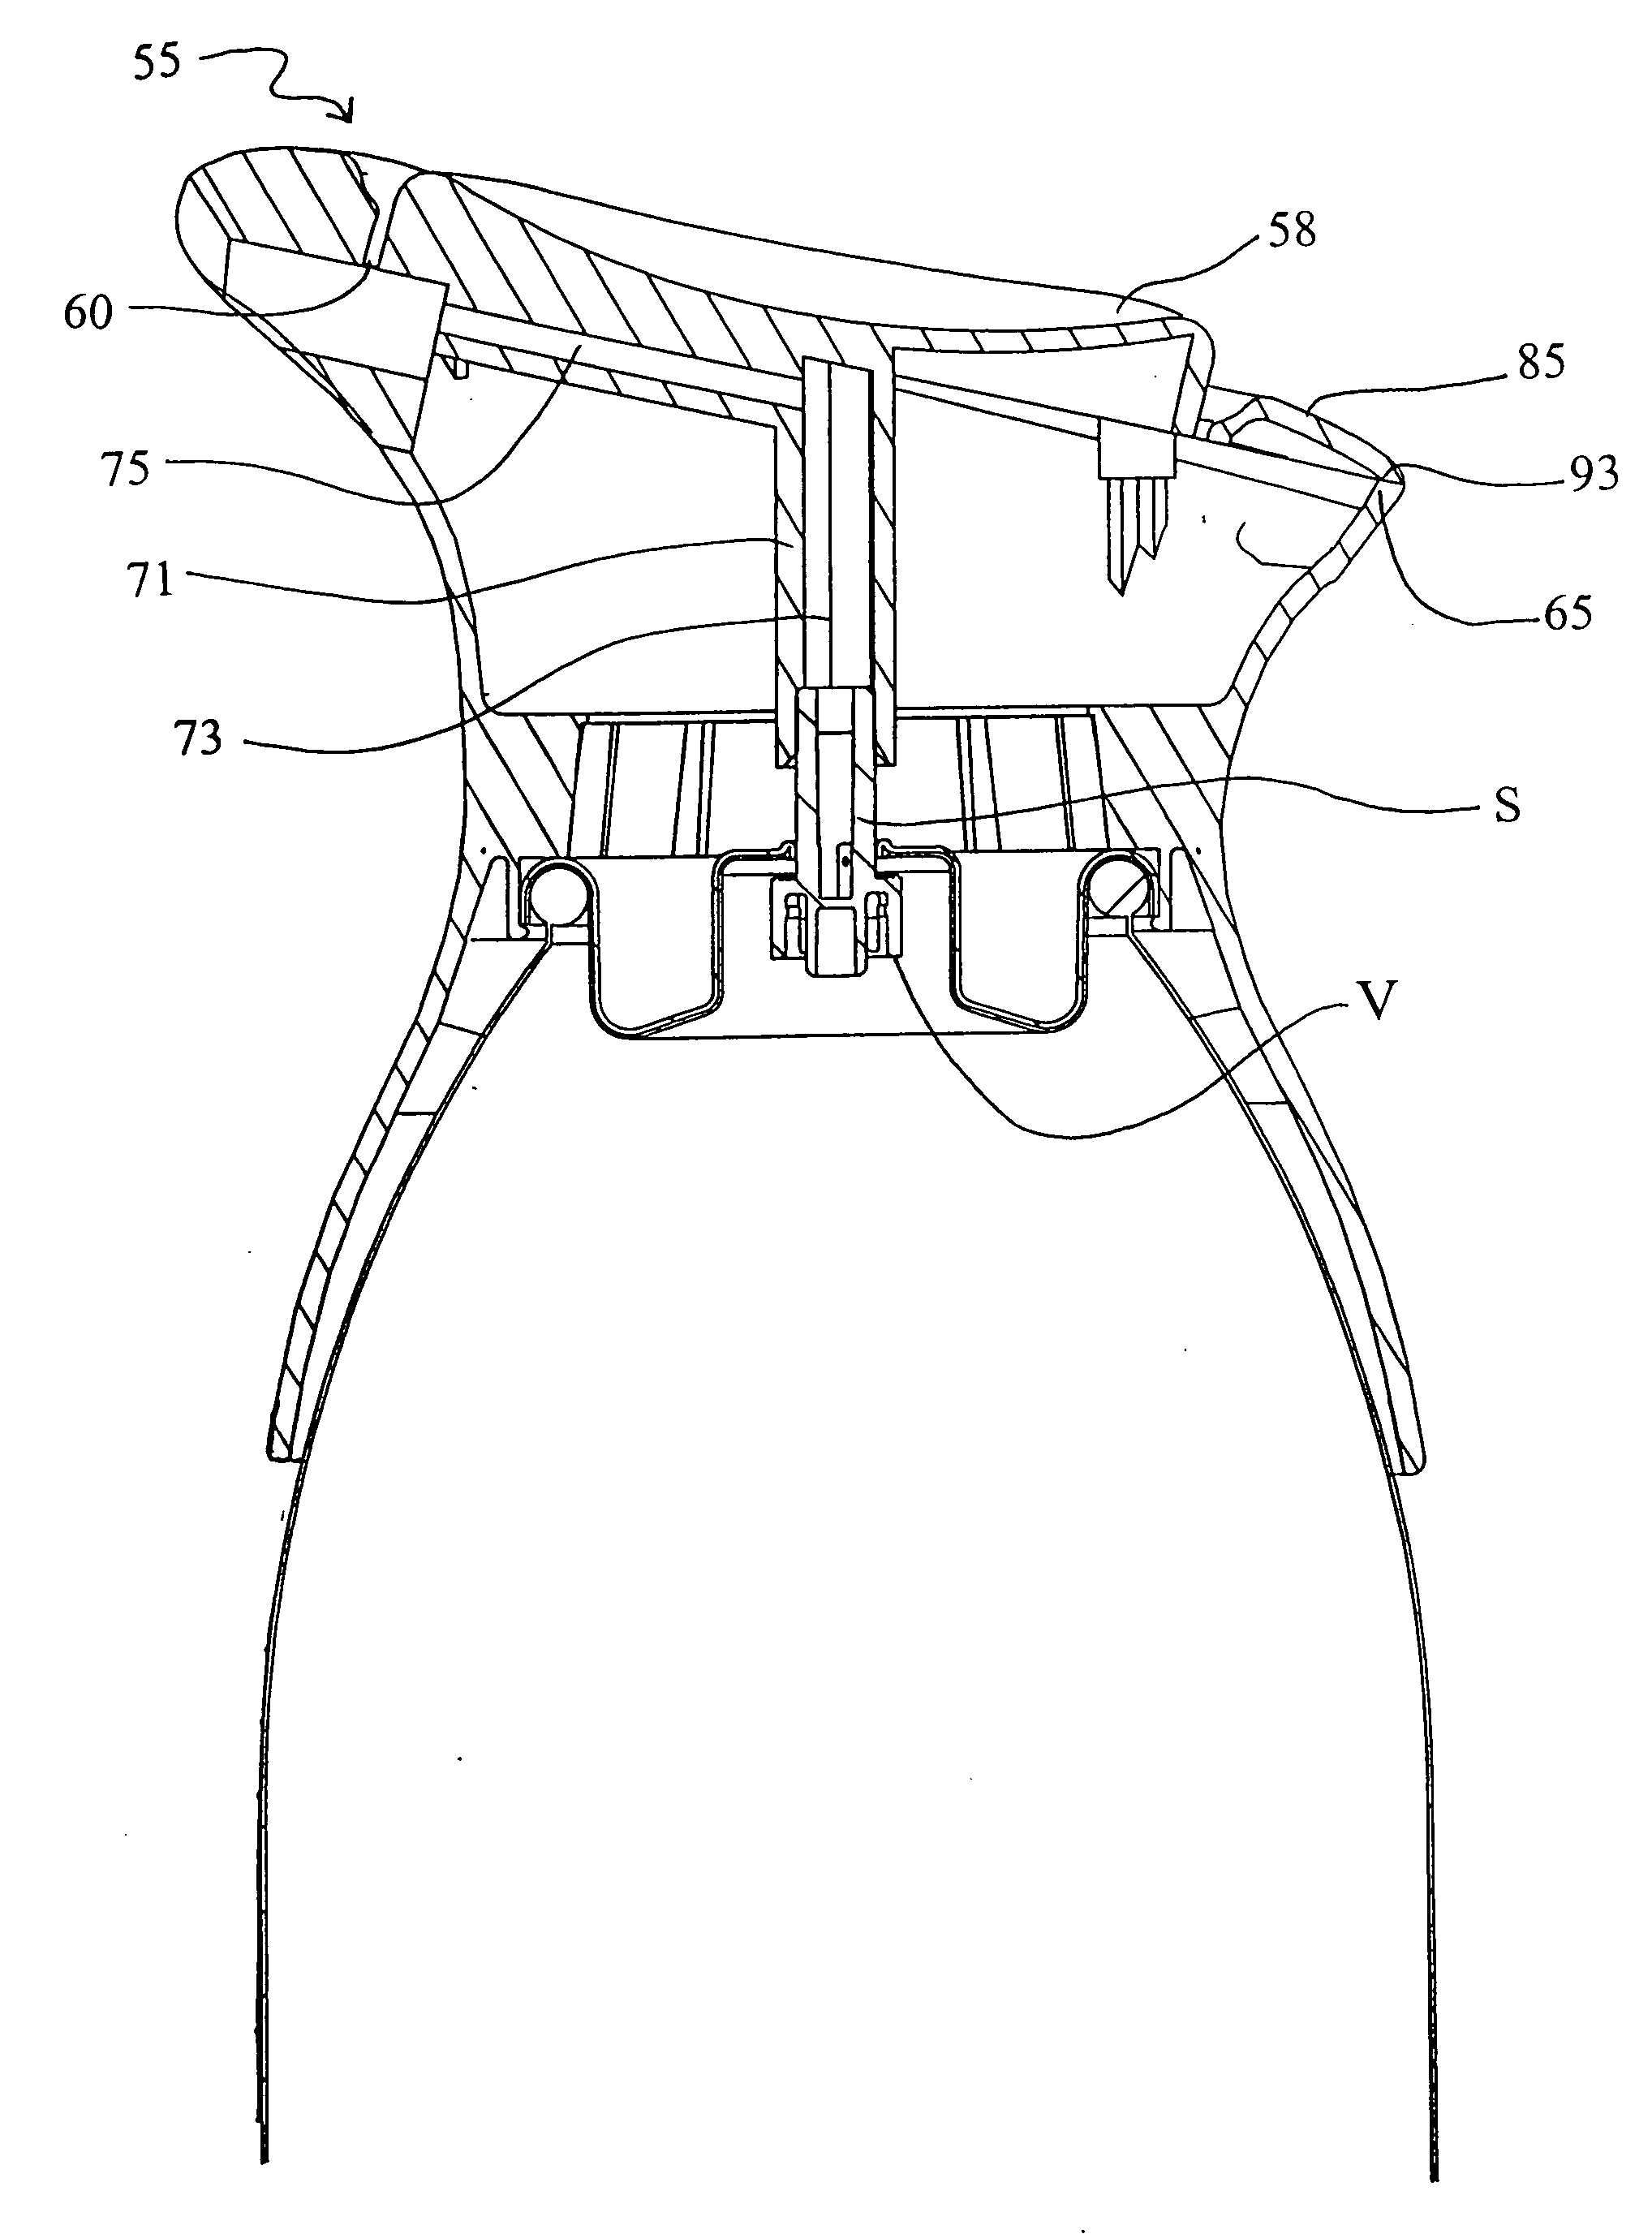 Button actuated mechanism for a dispensing canister